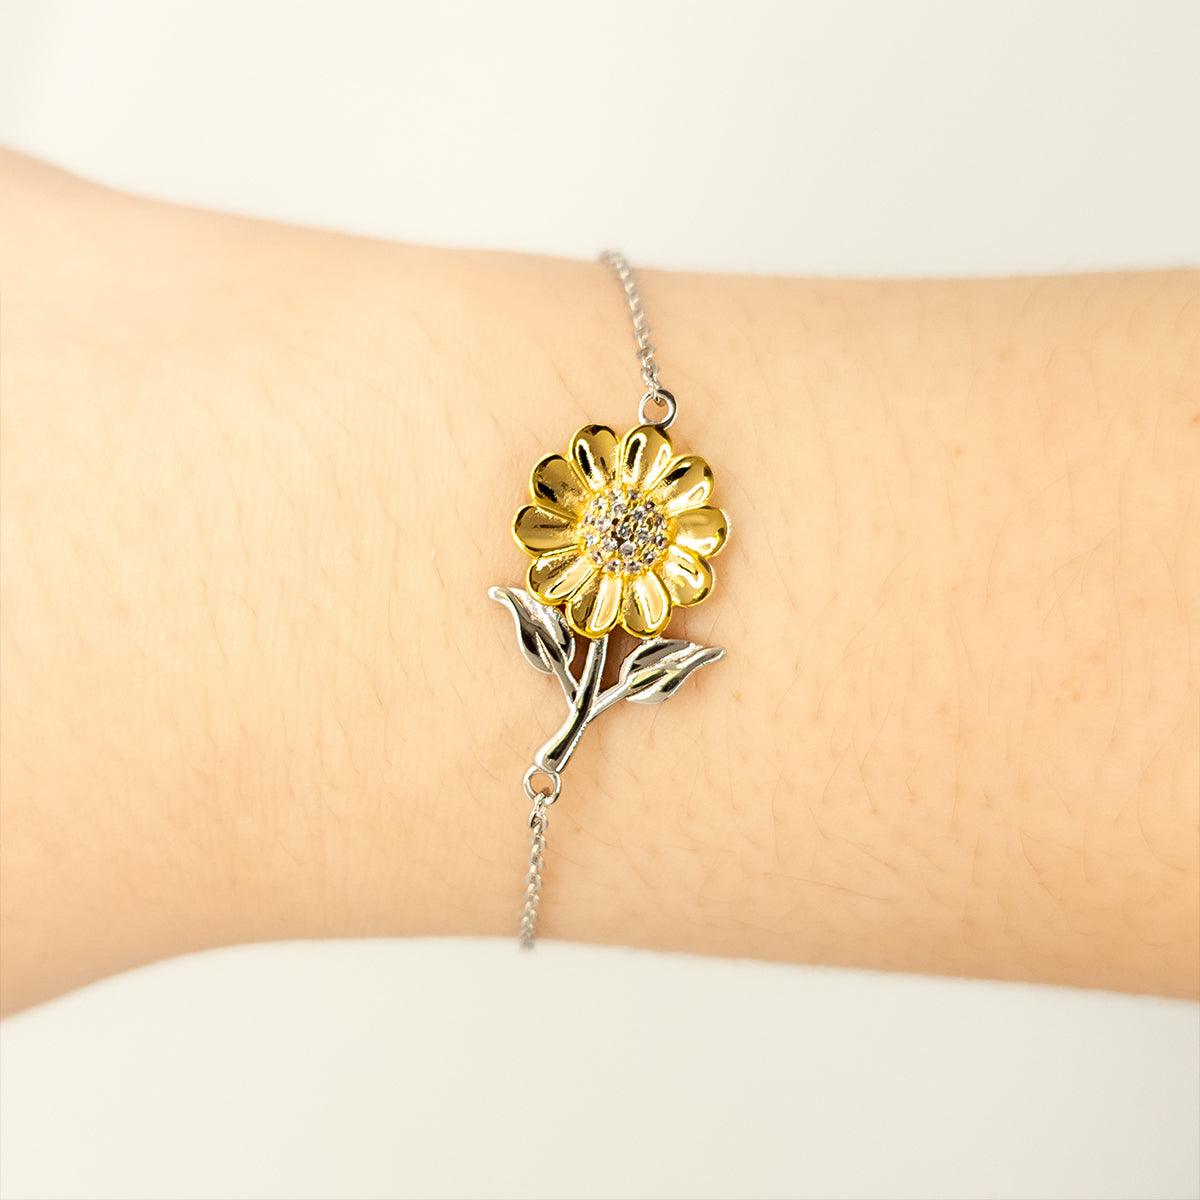 New Hampshire is my home Gifts, Lovely New Hampshire Birthday Christmas Sunflower Bracelet For People from New Hampshire, Men, Women, Friends - Mallard Moon Gift Shop